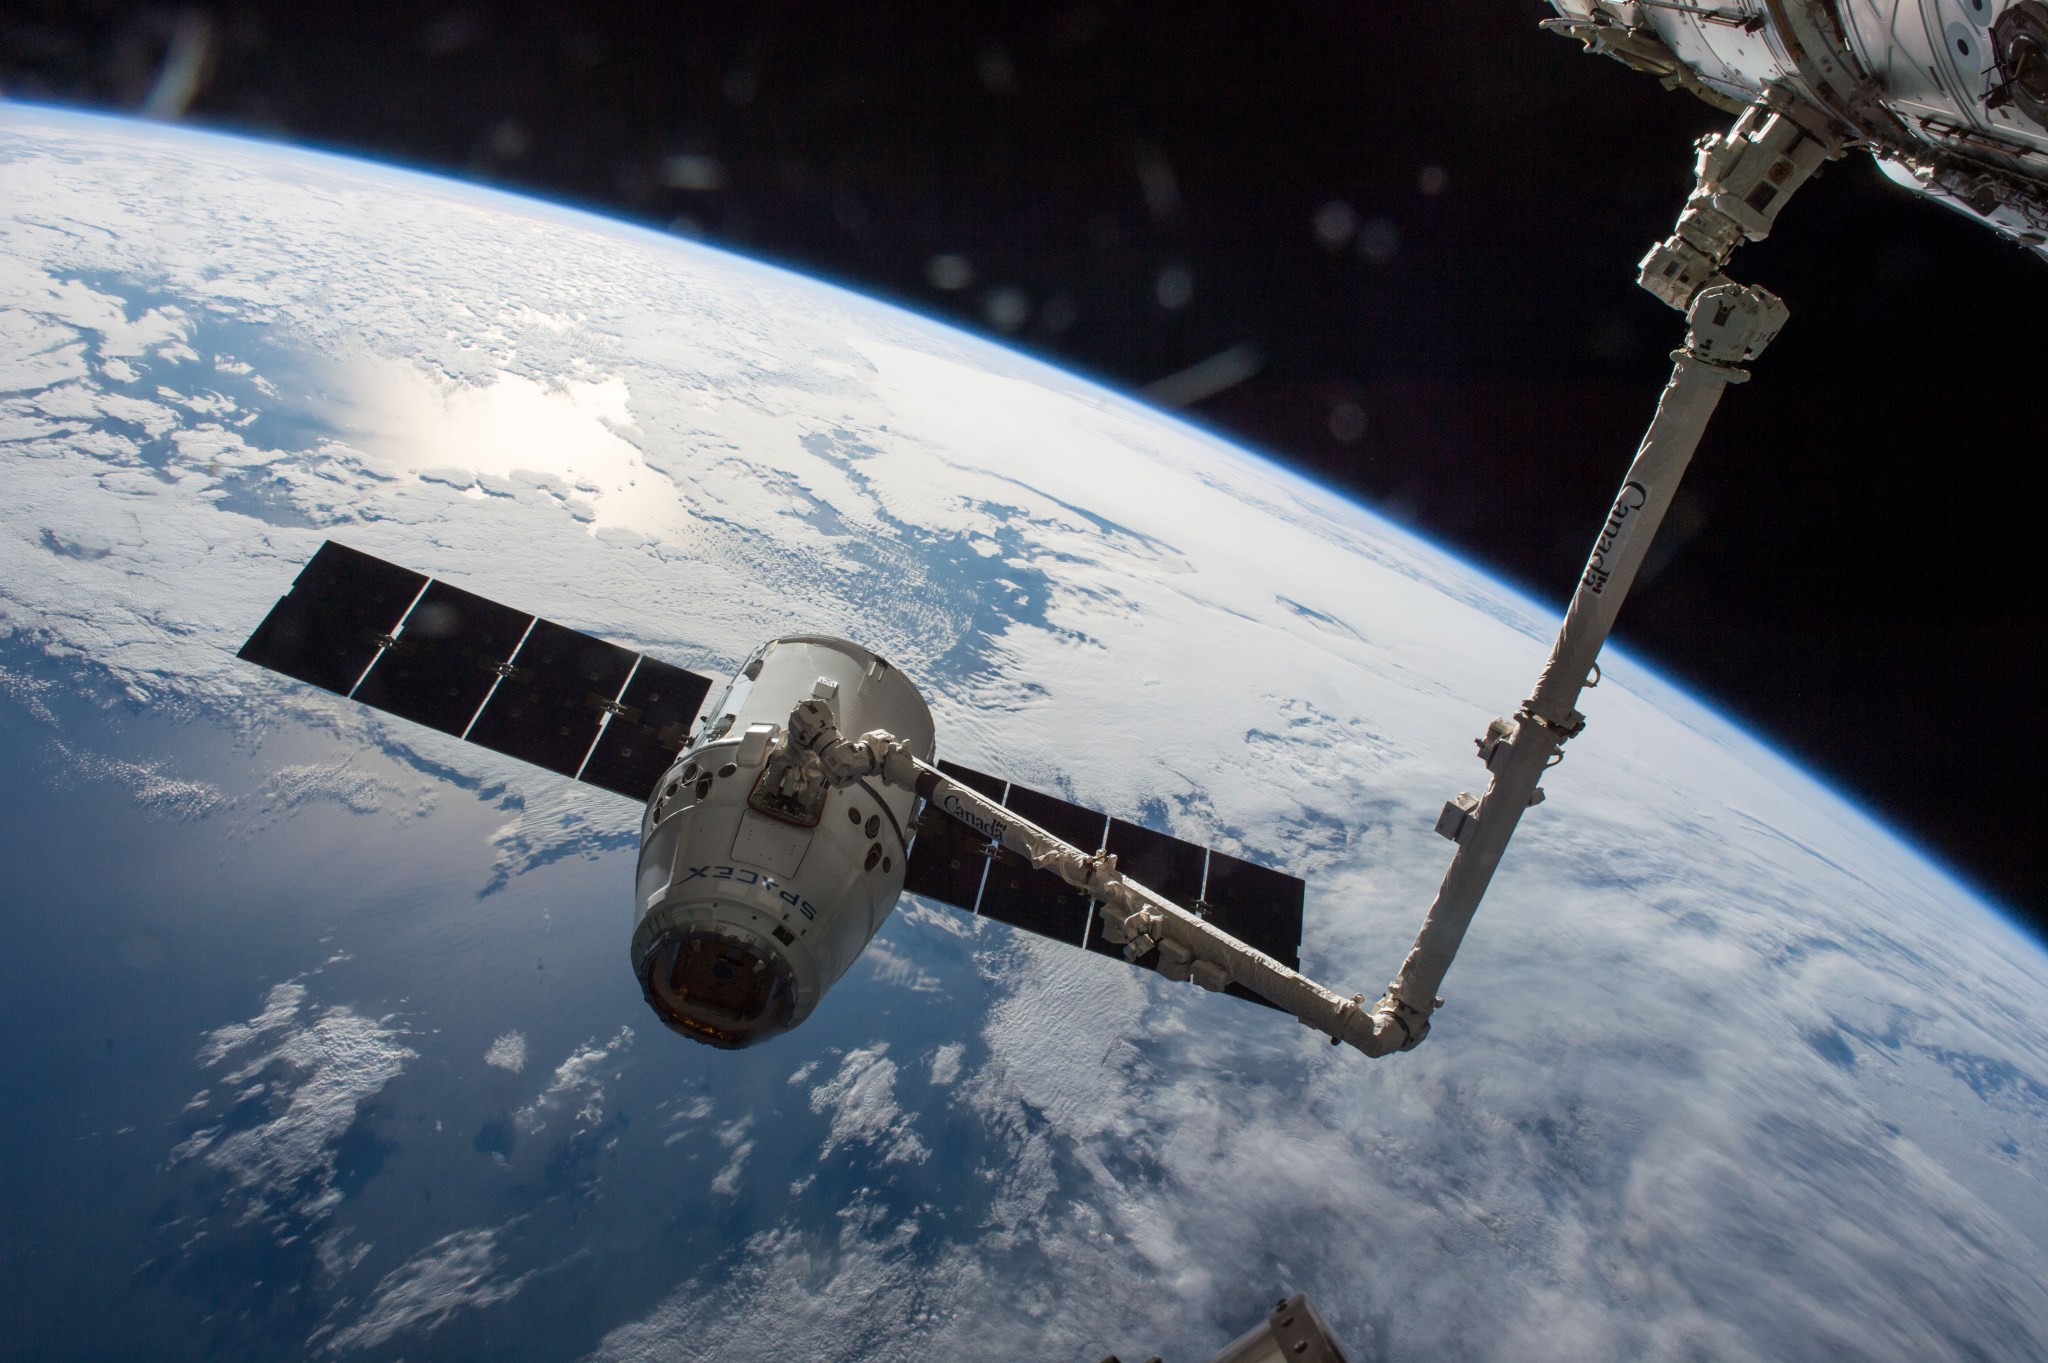 View of the SPX-8 SpaceX Dragon spacecraft grappled by the Canadarm2 Space Station Remote Manipulator System (SSRMS) during Expedition 47.